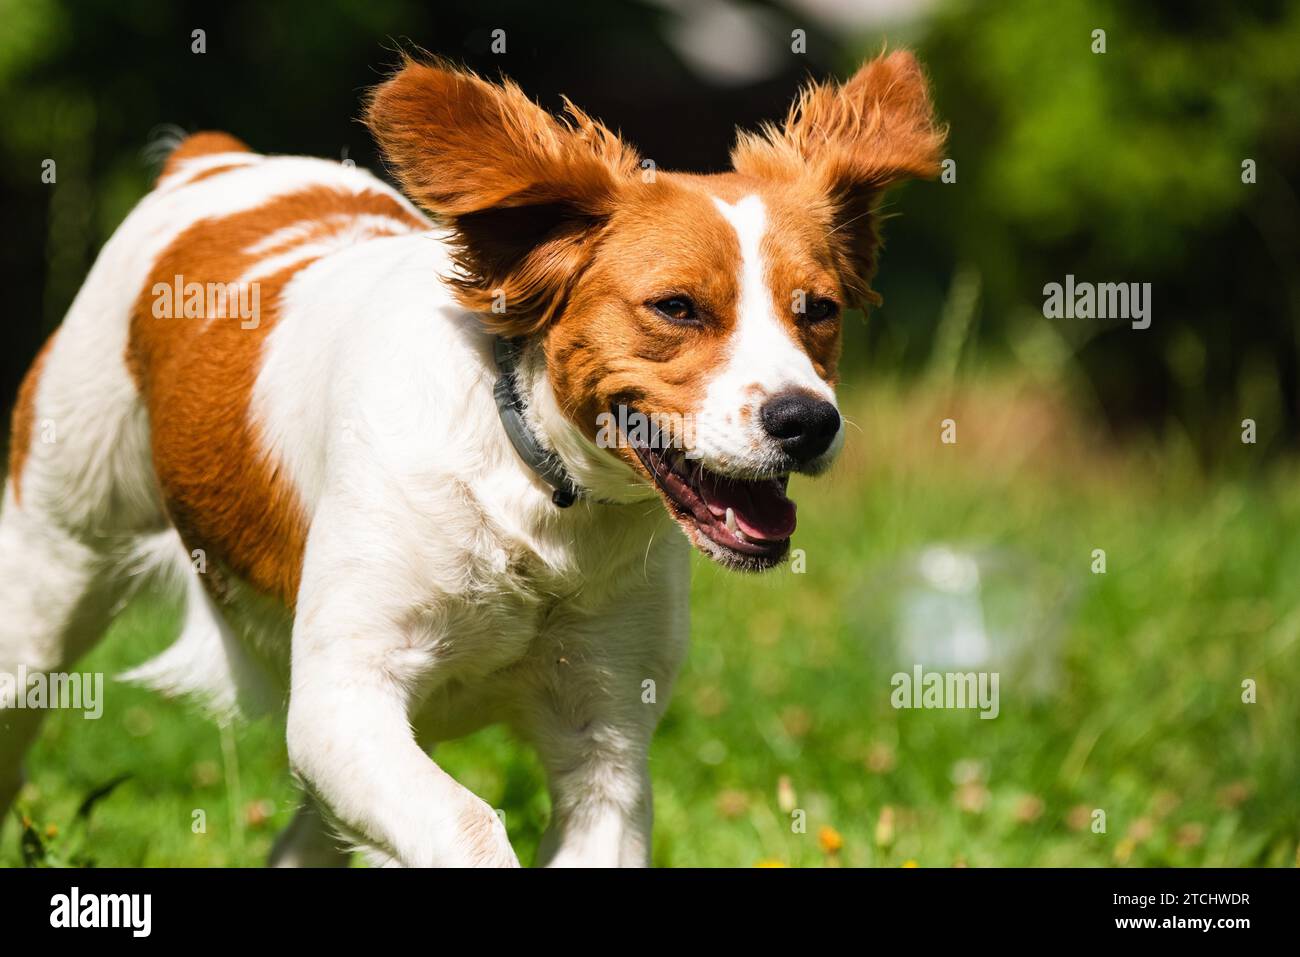 Brittany dog female puppy running through grass towards camera. Animal background. Copy space on right Stock Photo